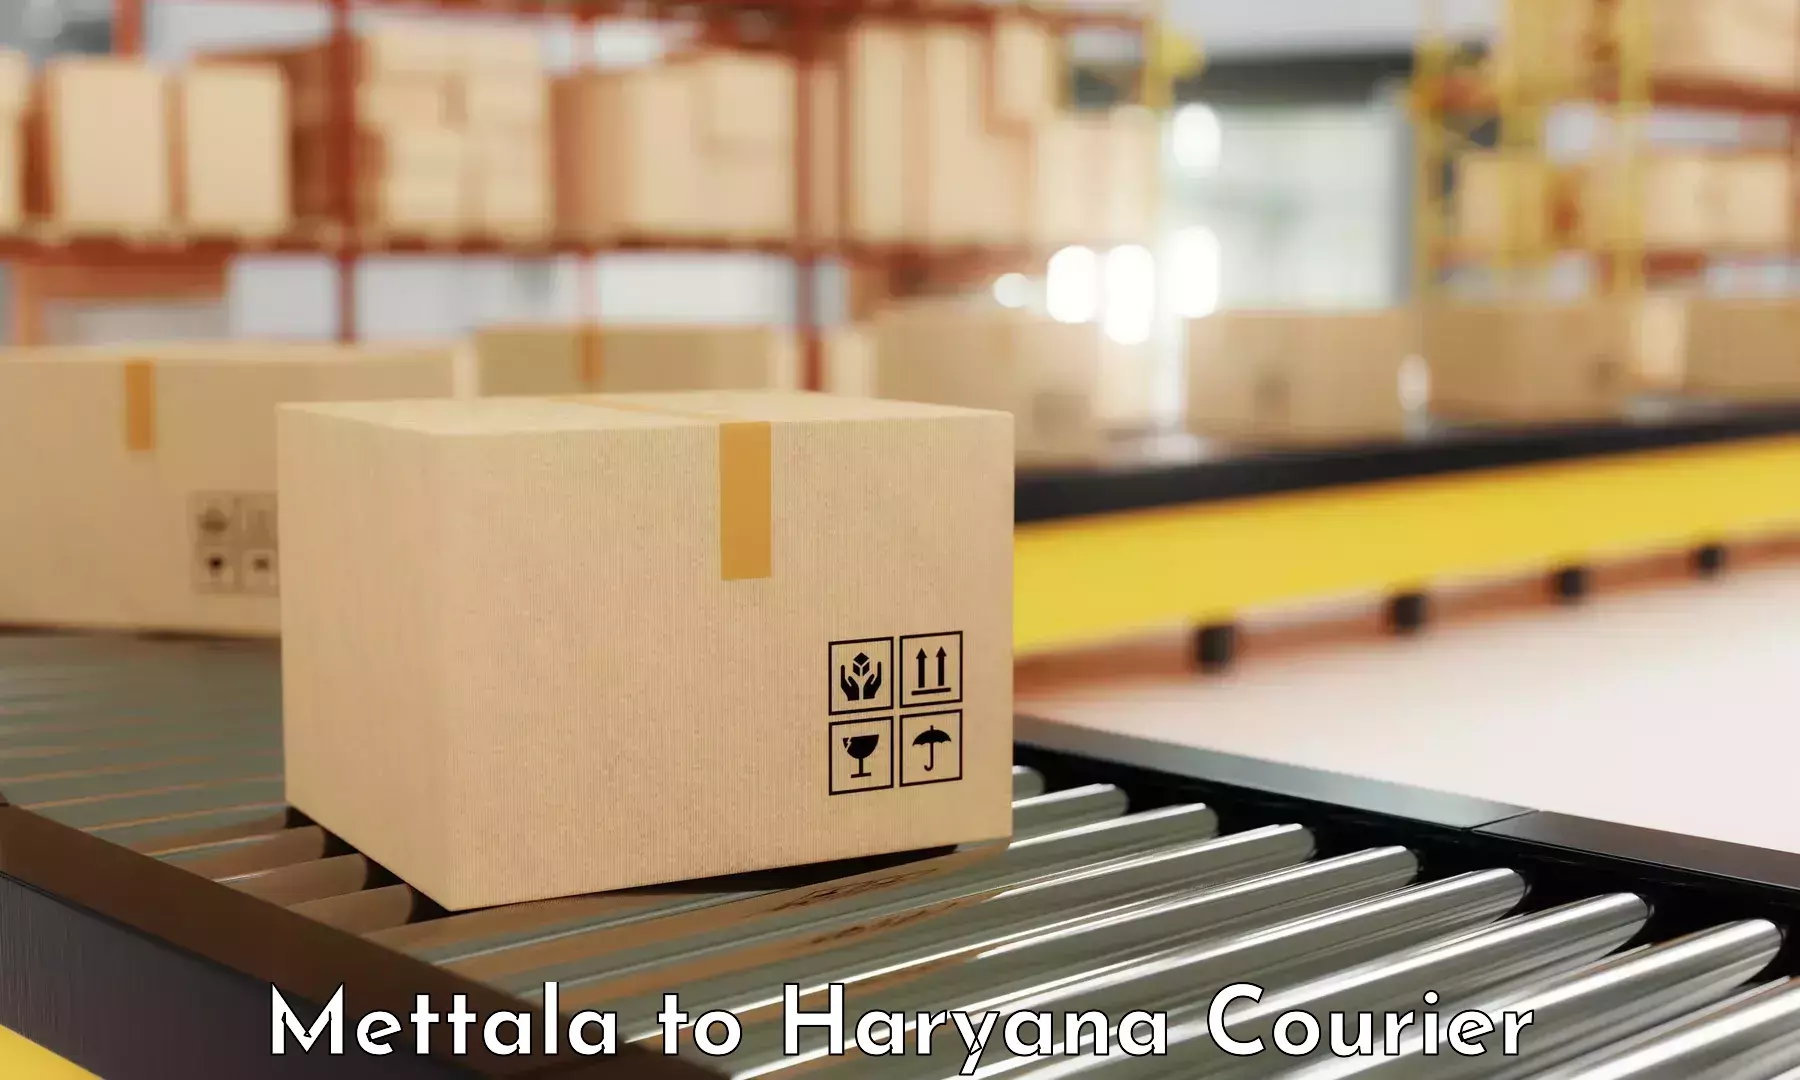 International courier networks Mettala to Haryana